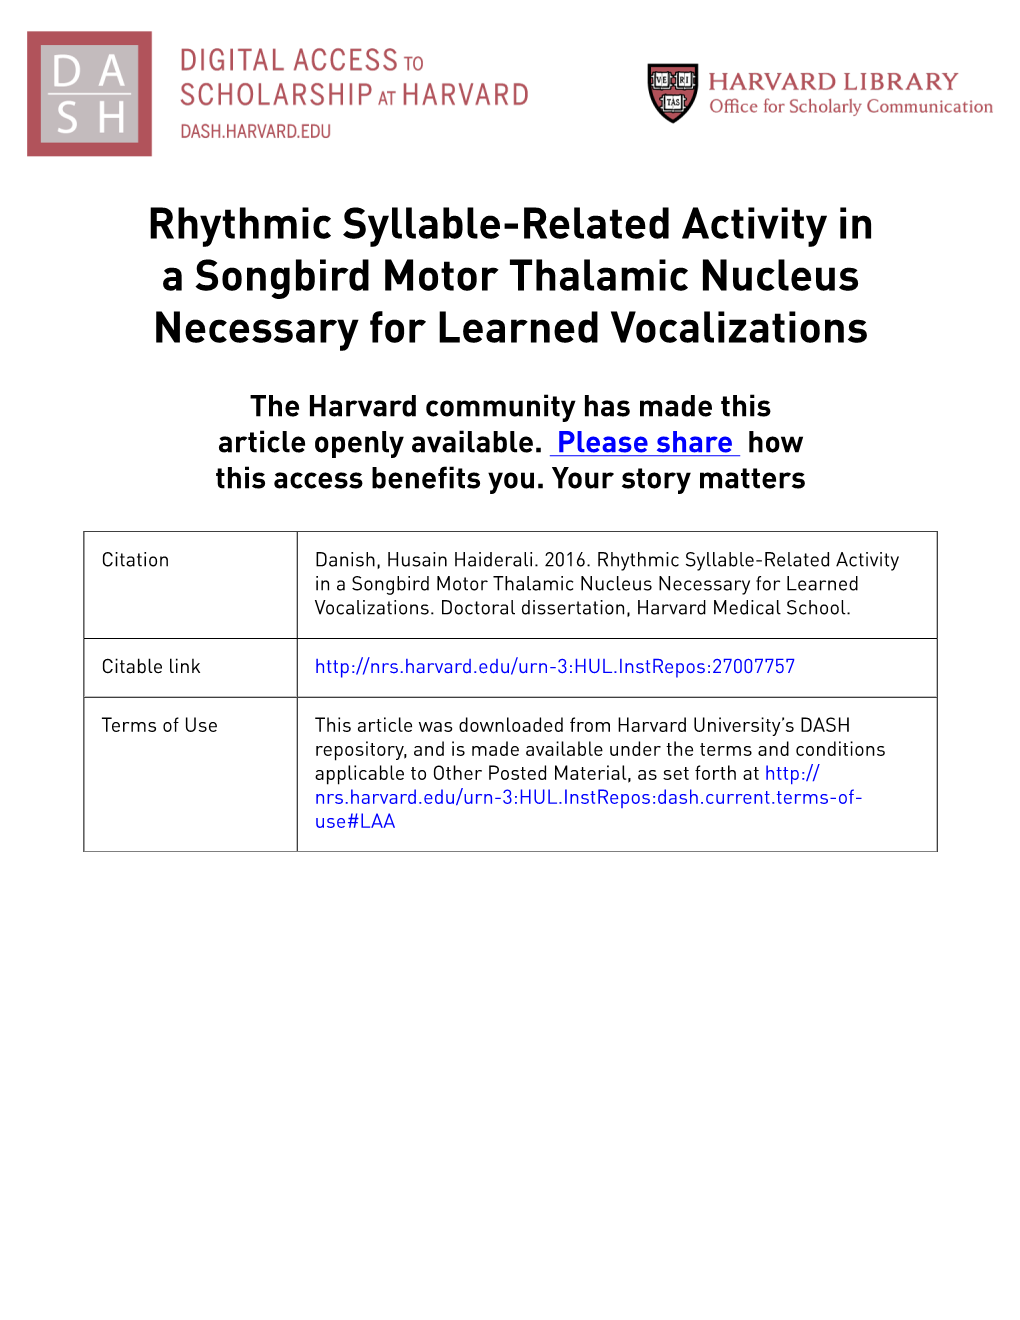 Rhythmic Syllable-Related Activity in a Songbird Motor Thalamic Nucleus Necessary for Learned Vocalizations